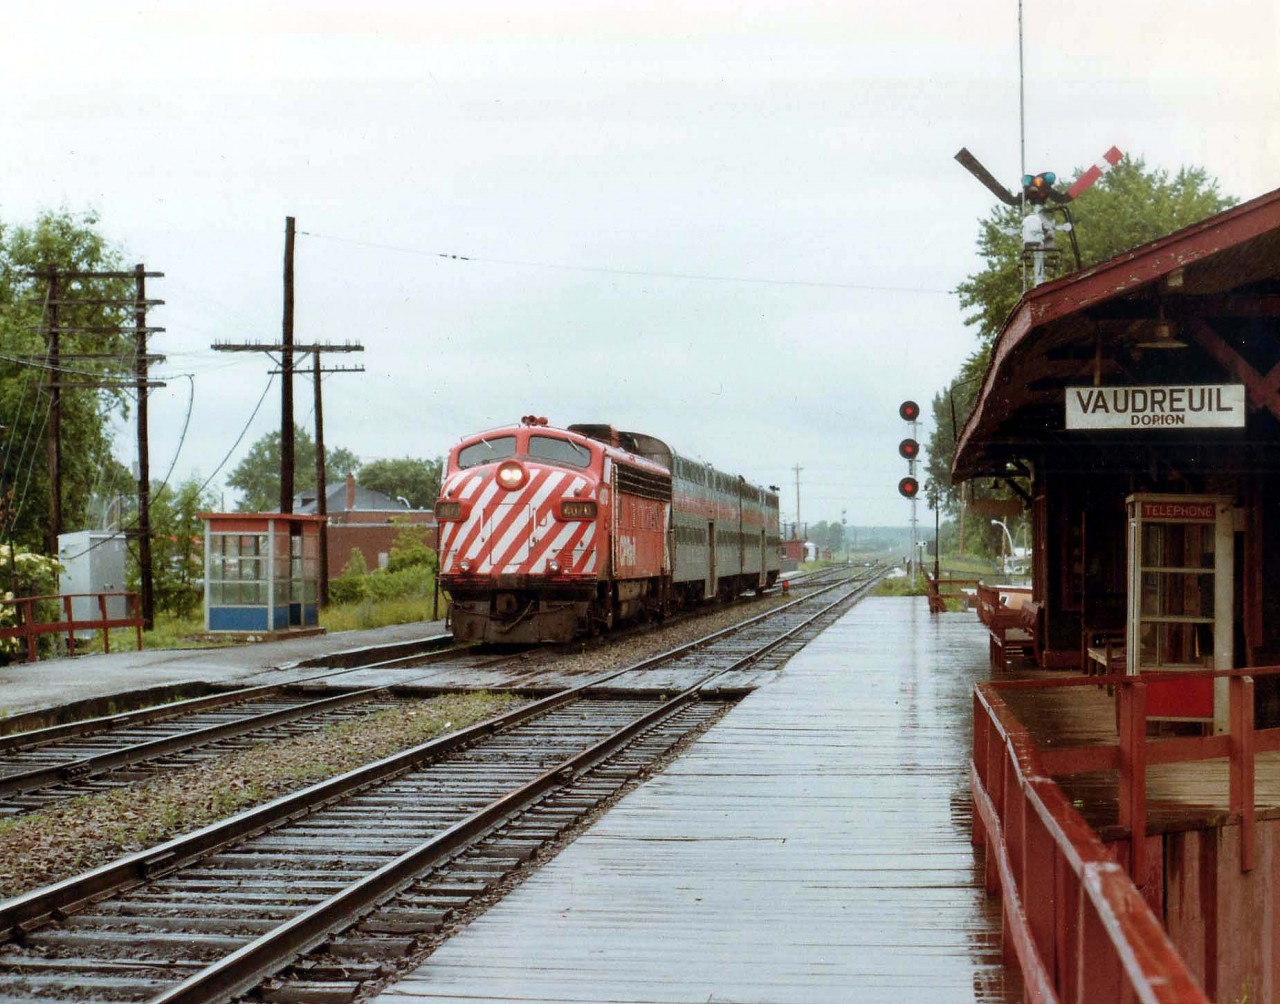 Obviously a miserable day to be passing thru the Montreal area, but thems the breaks.............this old image of CP 4070 working on commuter service a la Urban Transit Commission-Montreal (CTCUM) is of interest because this photo is from mid-1981 and the CTG notes the CTCUM acquired this engine in 1982......and it then became AMT 1300 at a much later date.  (The CTCUM/STCUM gave way to AMT in 1996) The AMT 1300 was then retired in 2002 and went to the Quebec Central Rwy in 2003. Currently stored unserviceable.